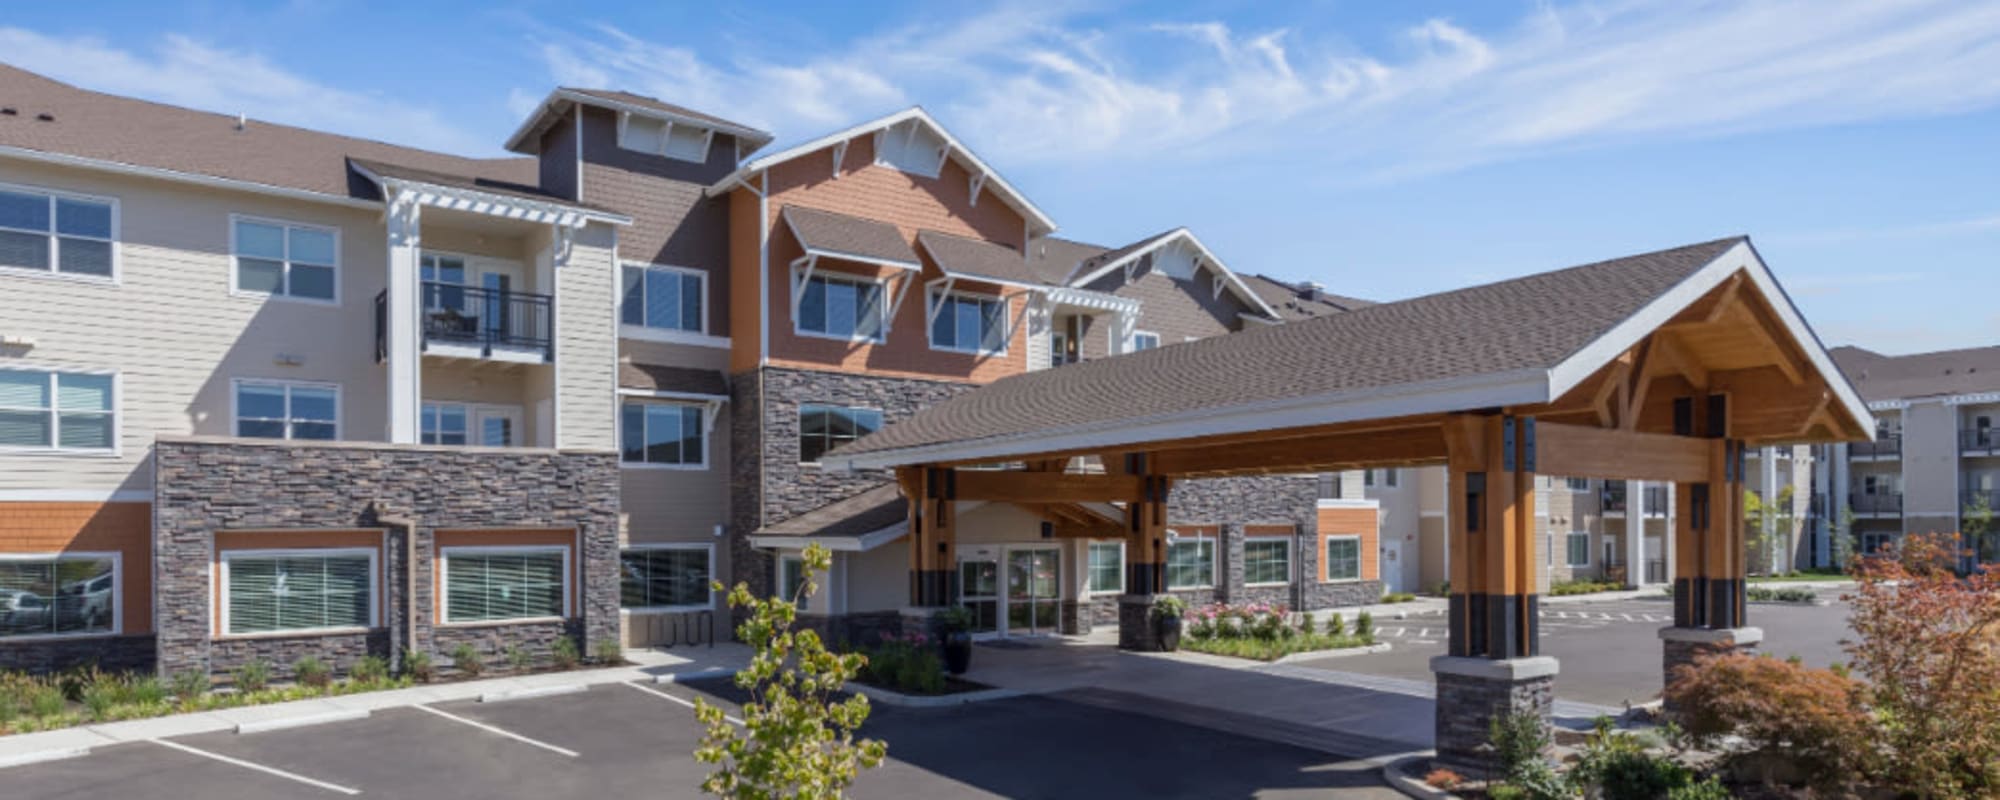 Covered entranceway to an upscale senior living facility at The Springs at Sherwood senior living in Sherwood, Oregon